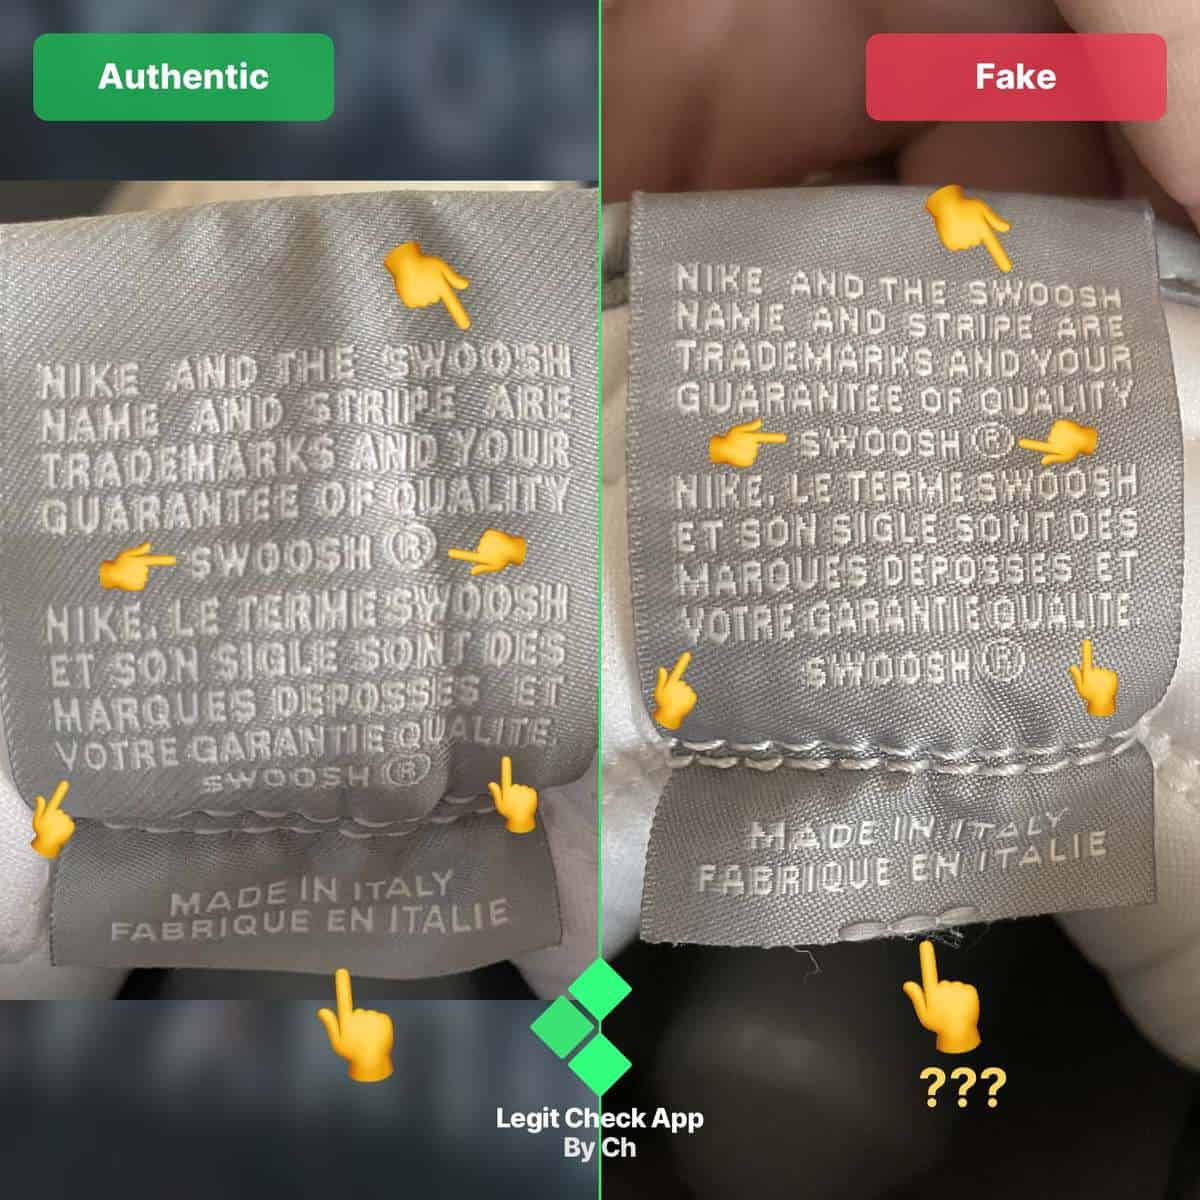 Christian Dior hoodie real vs fake review How to spot fake Dior hoodies  and sweatshirts  YouTube